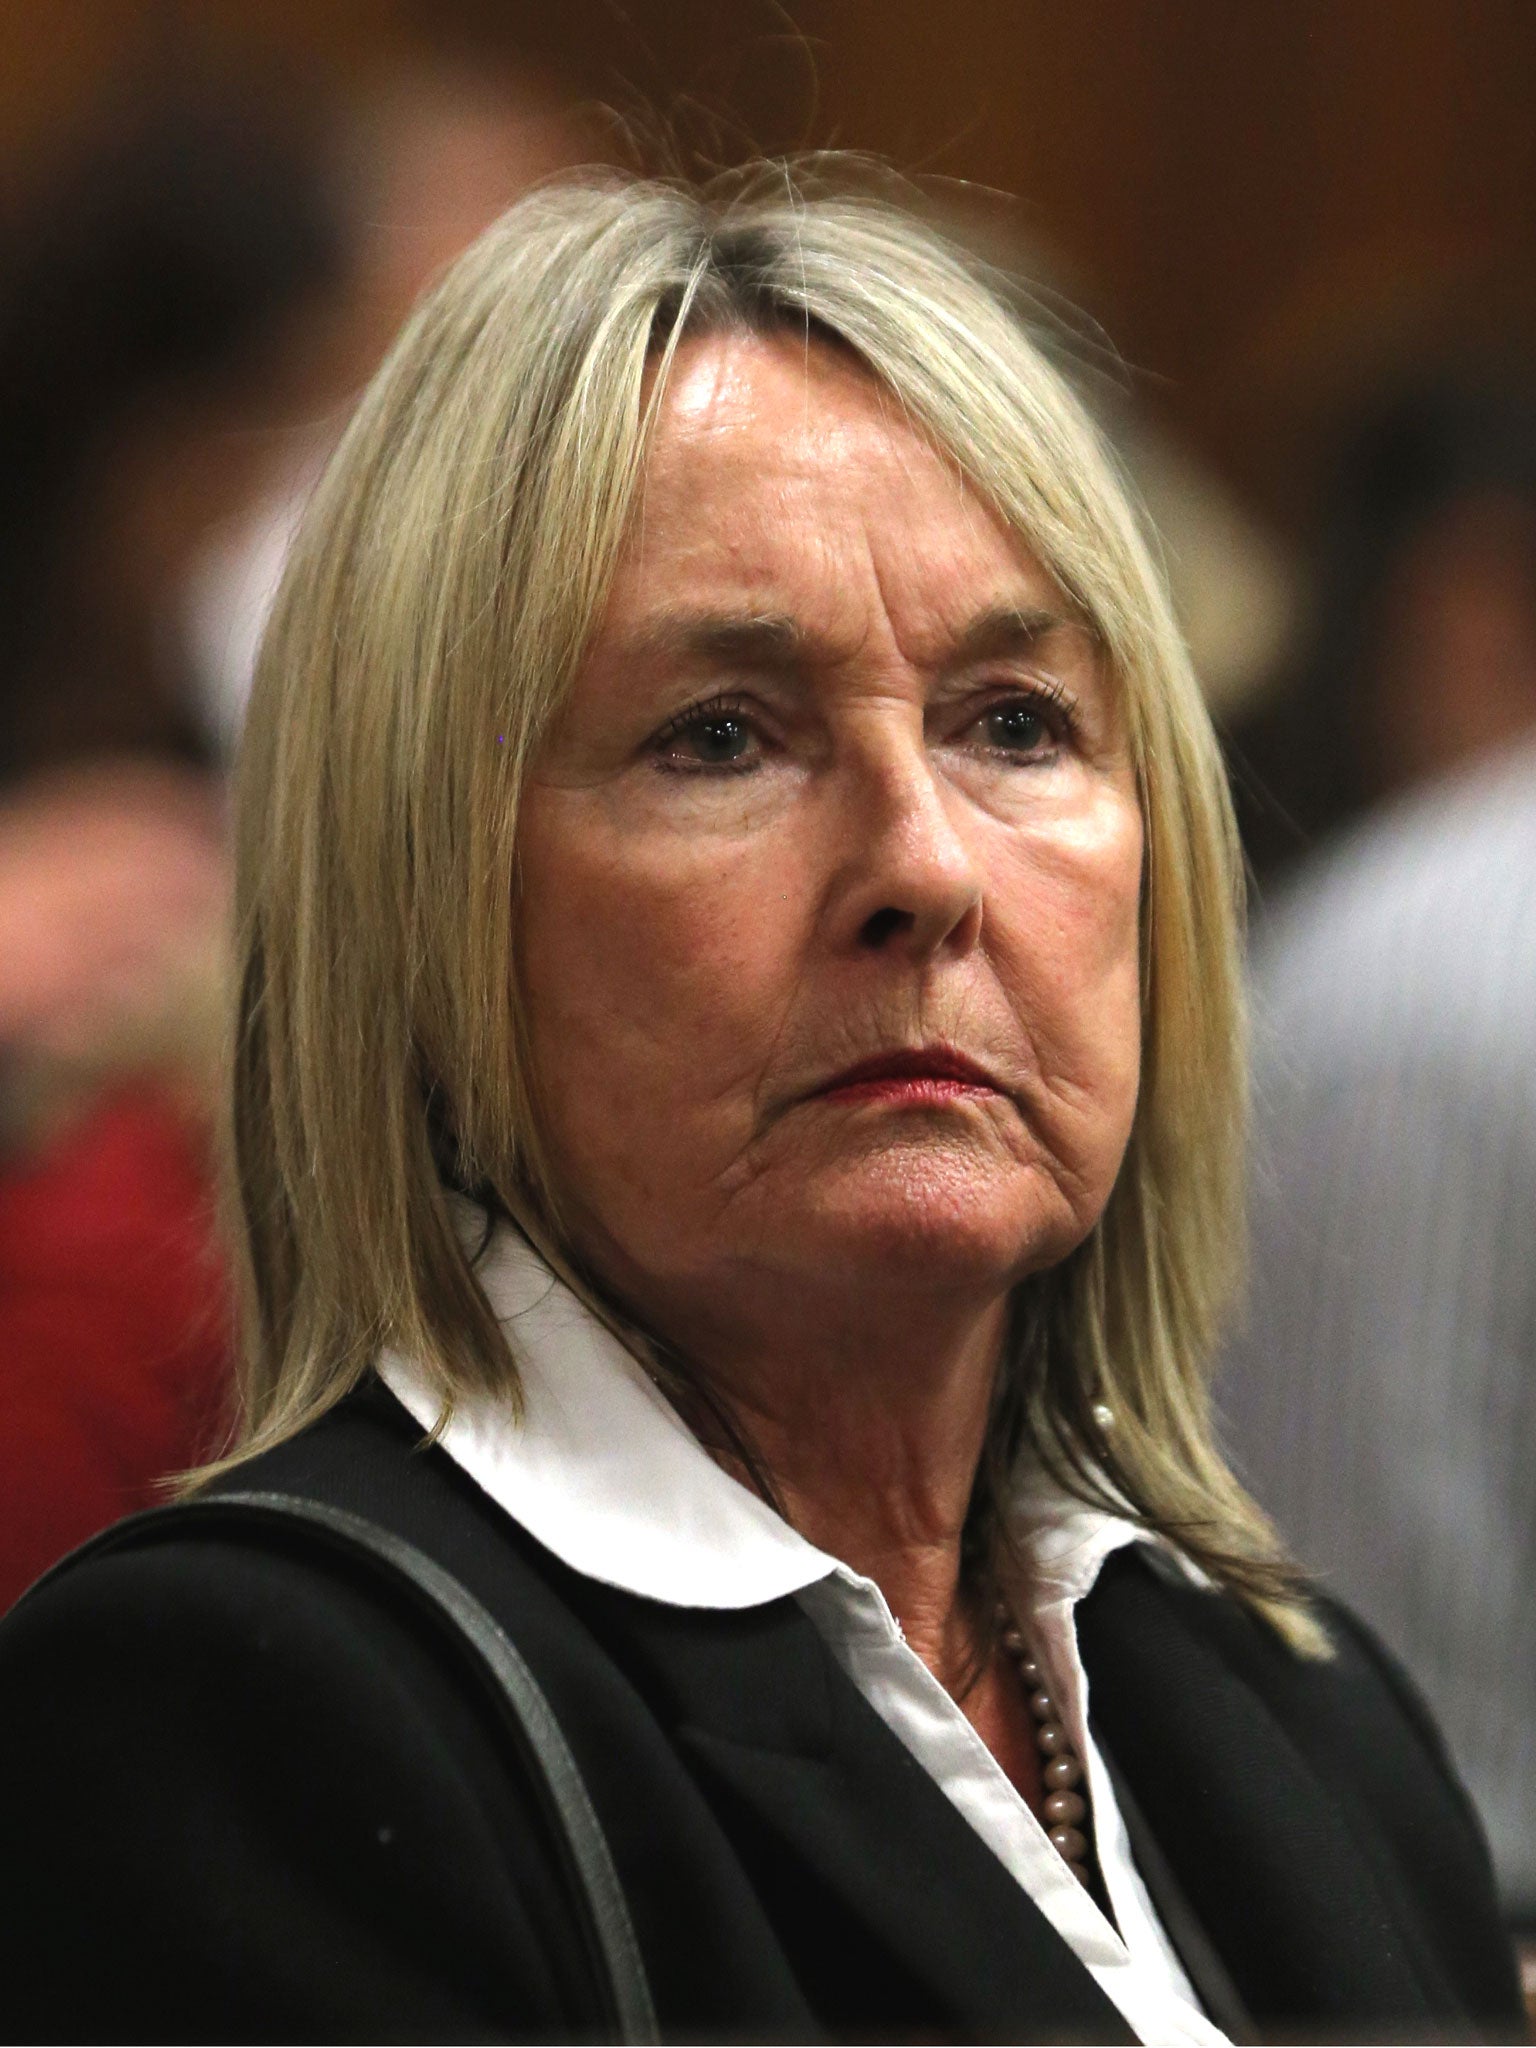 June Steenkamp, mother of the late Reeva Steenkamp listens to evidence by a pathologist during the murder trial of Oscar Pistorius in court in Pretoria